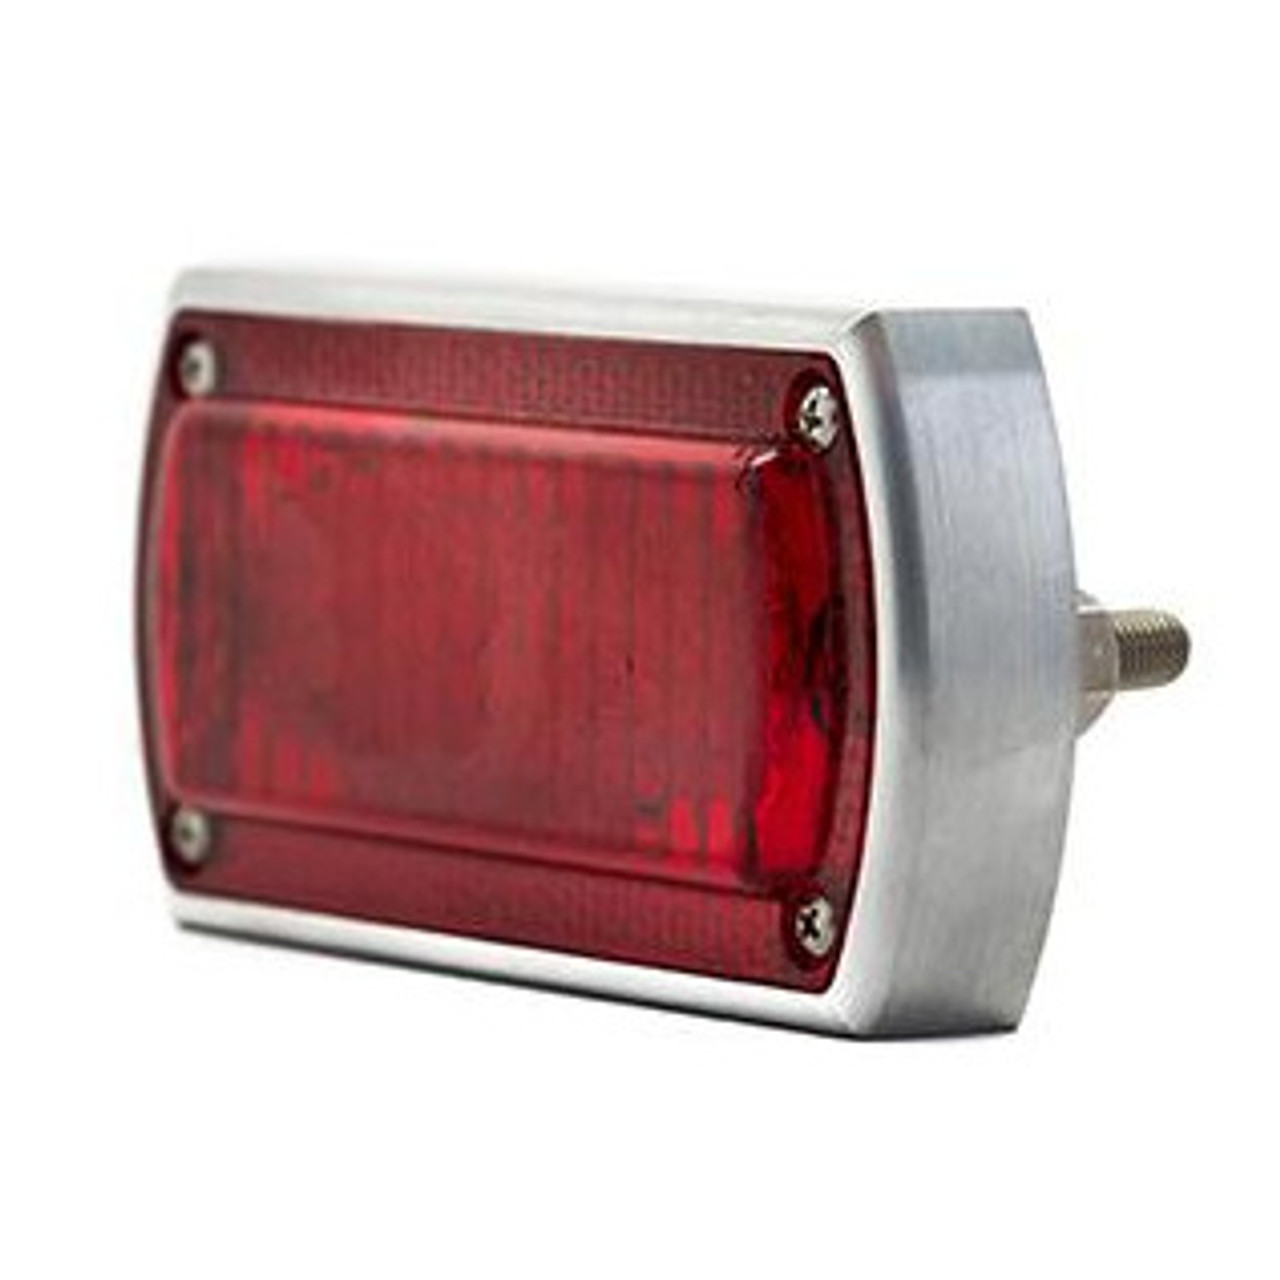 Taillight »Box Chopper« by Prism Supply Co.